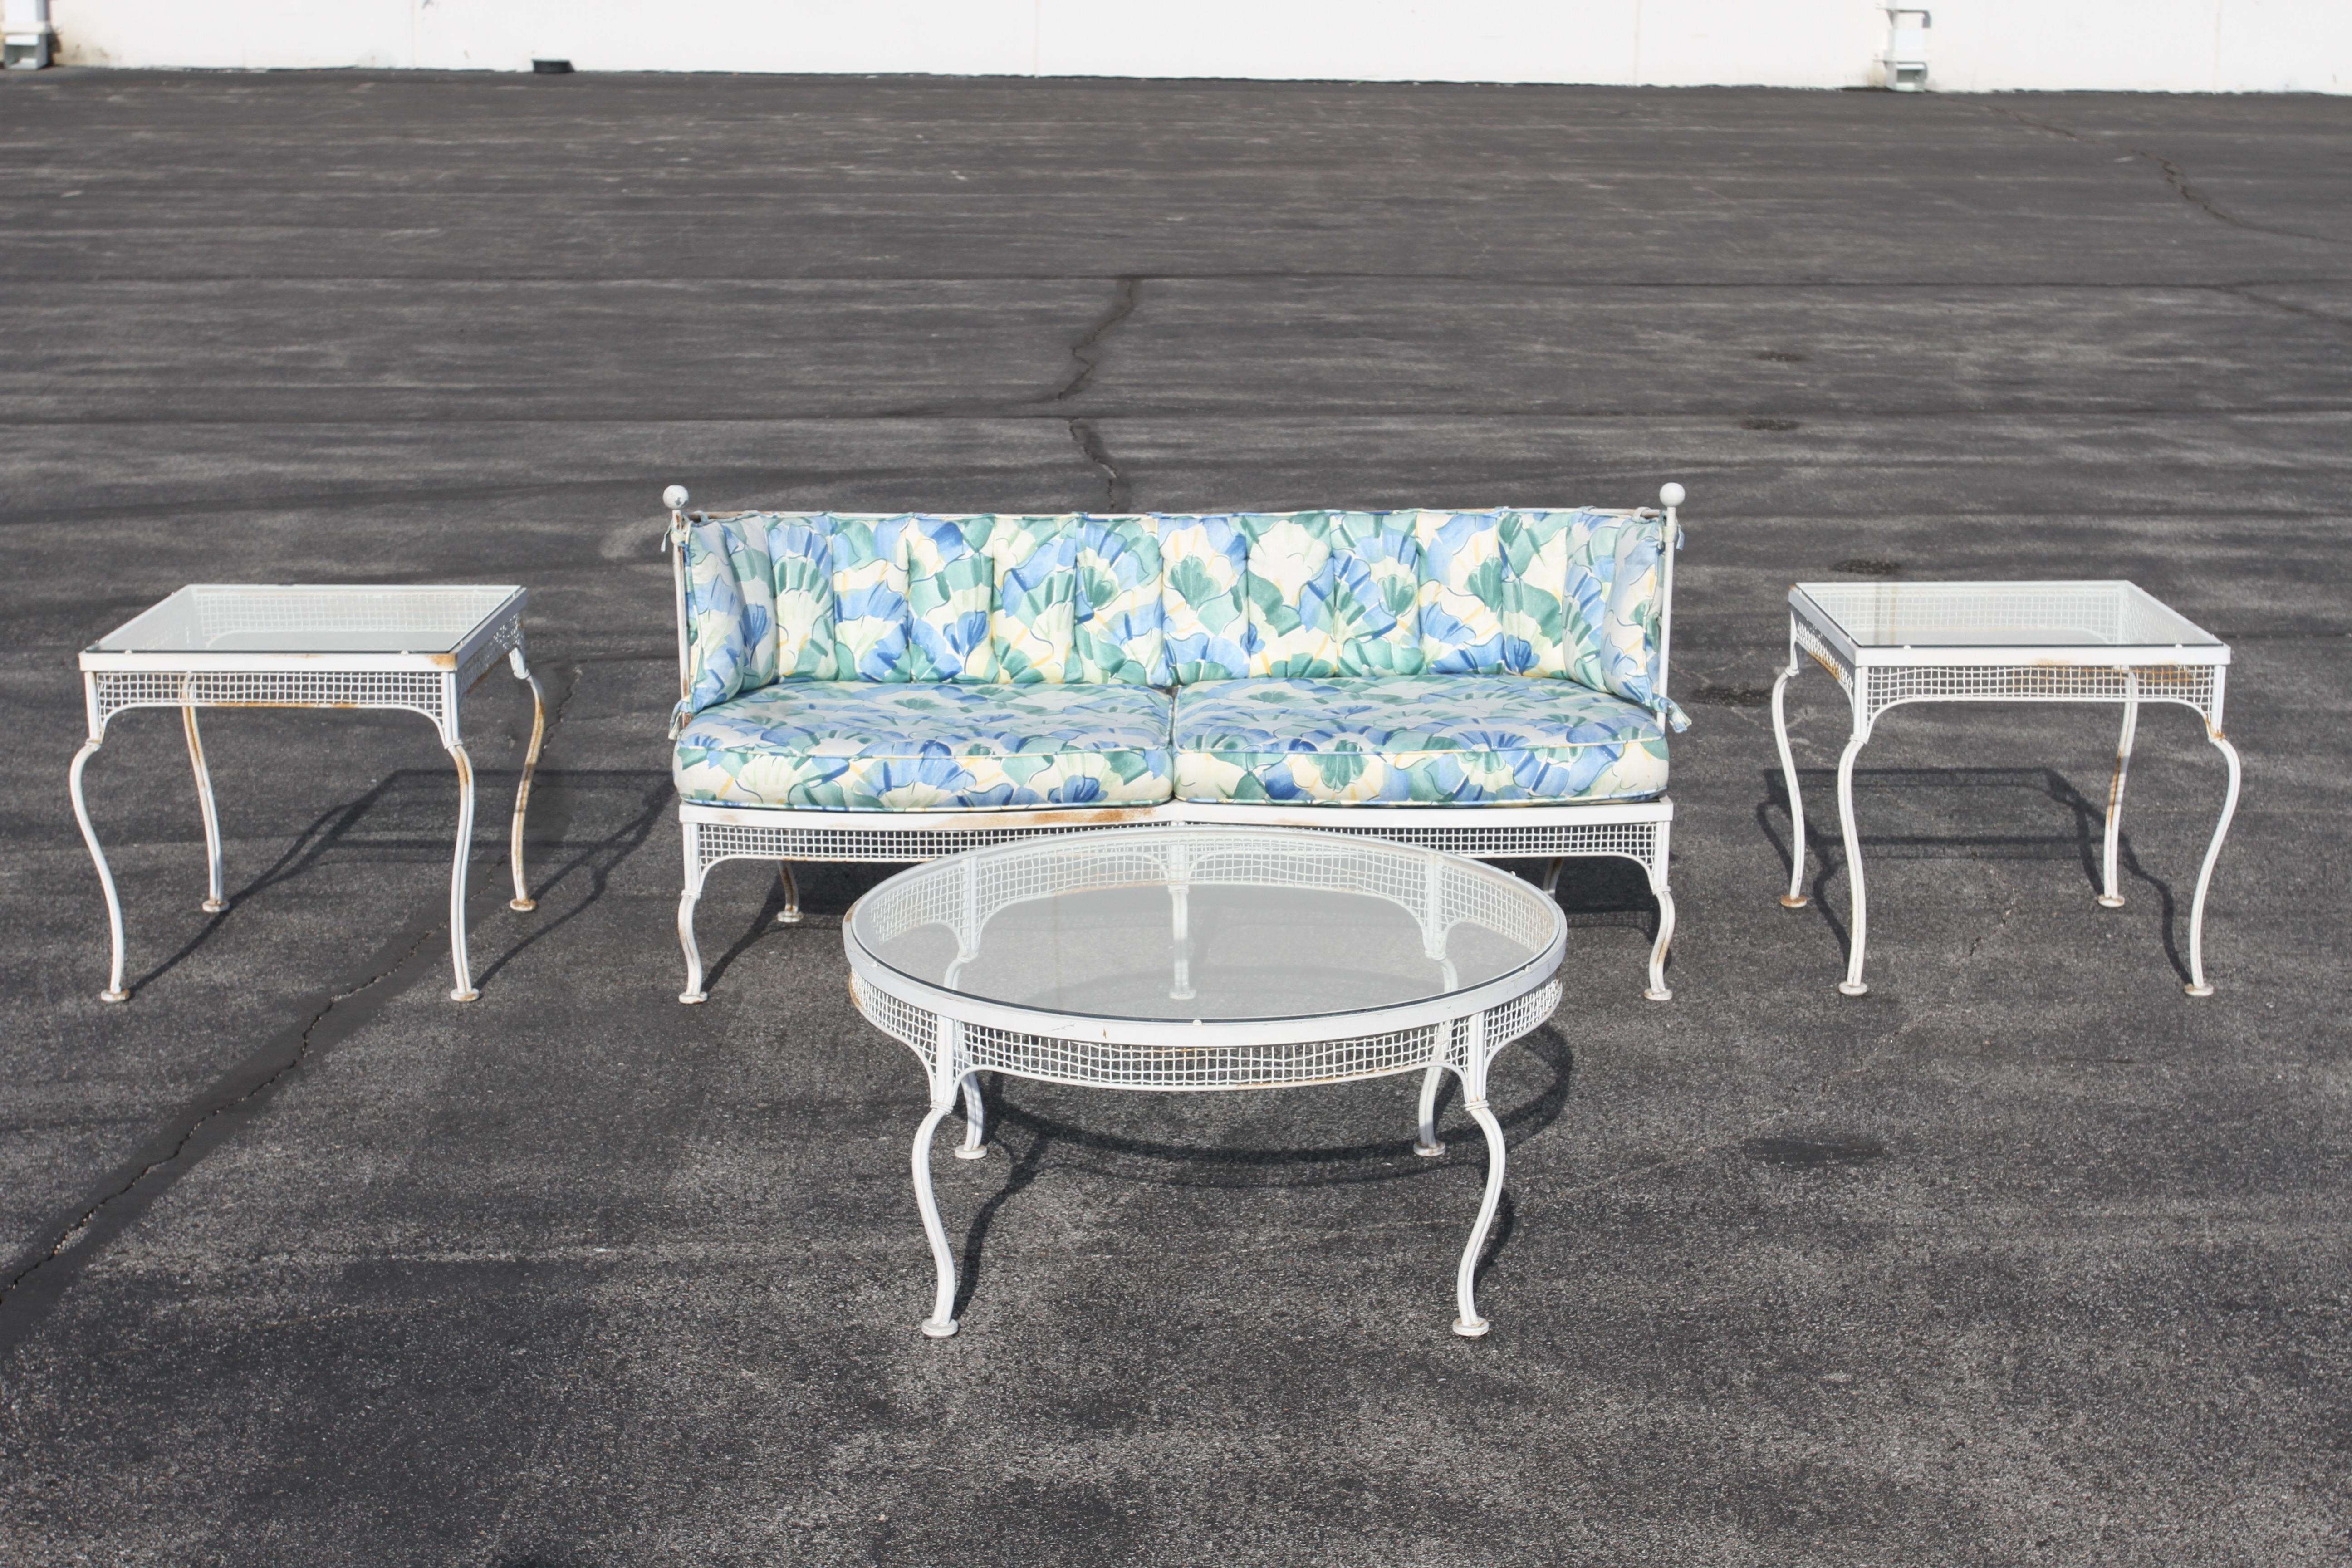 Classic and Rare 1950s midcentury Palm Beach Style outdoor wrought iron and mesh patio / garden round glass top coffee table by Woodard Furniture Co. Part of a original set I'm offering for sale, see the matching tub / lounge chairs & table, end